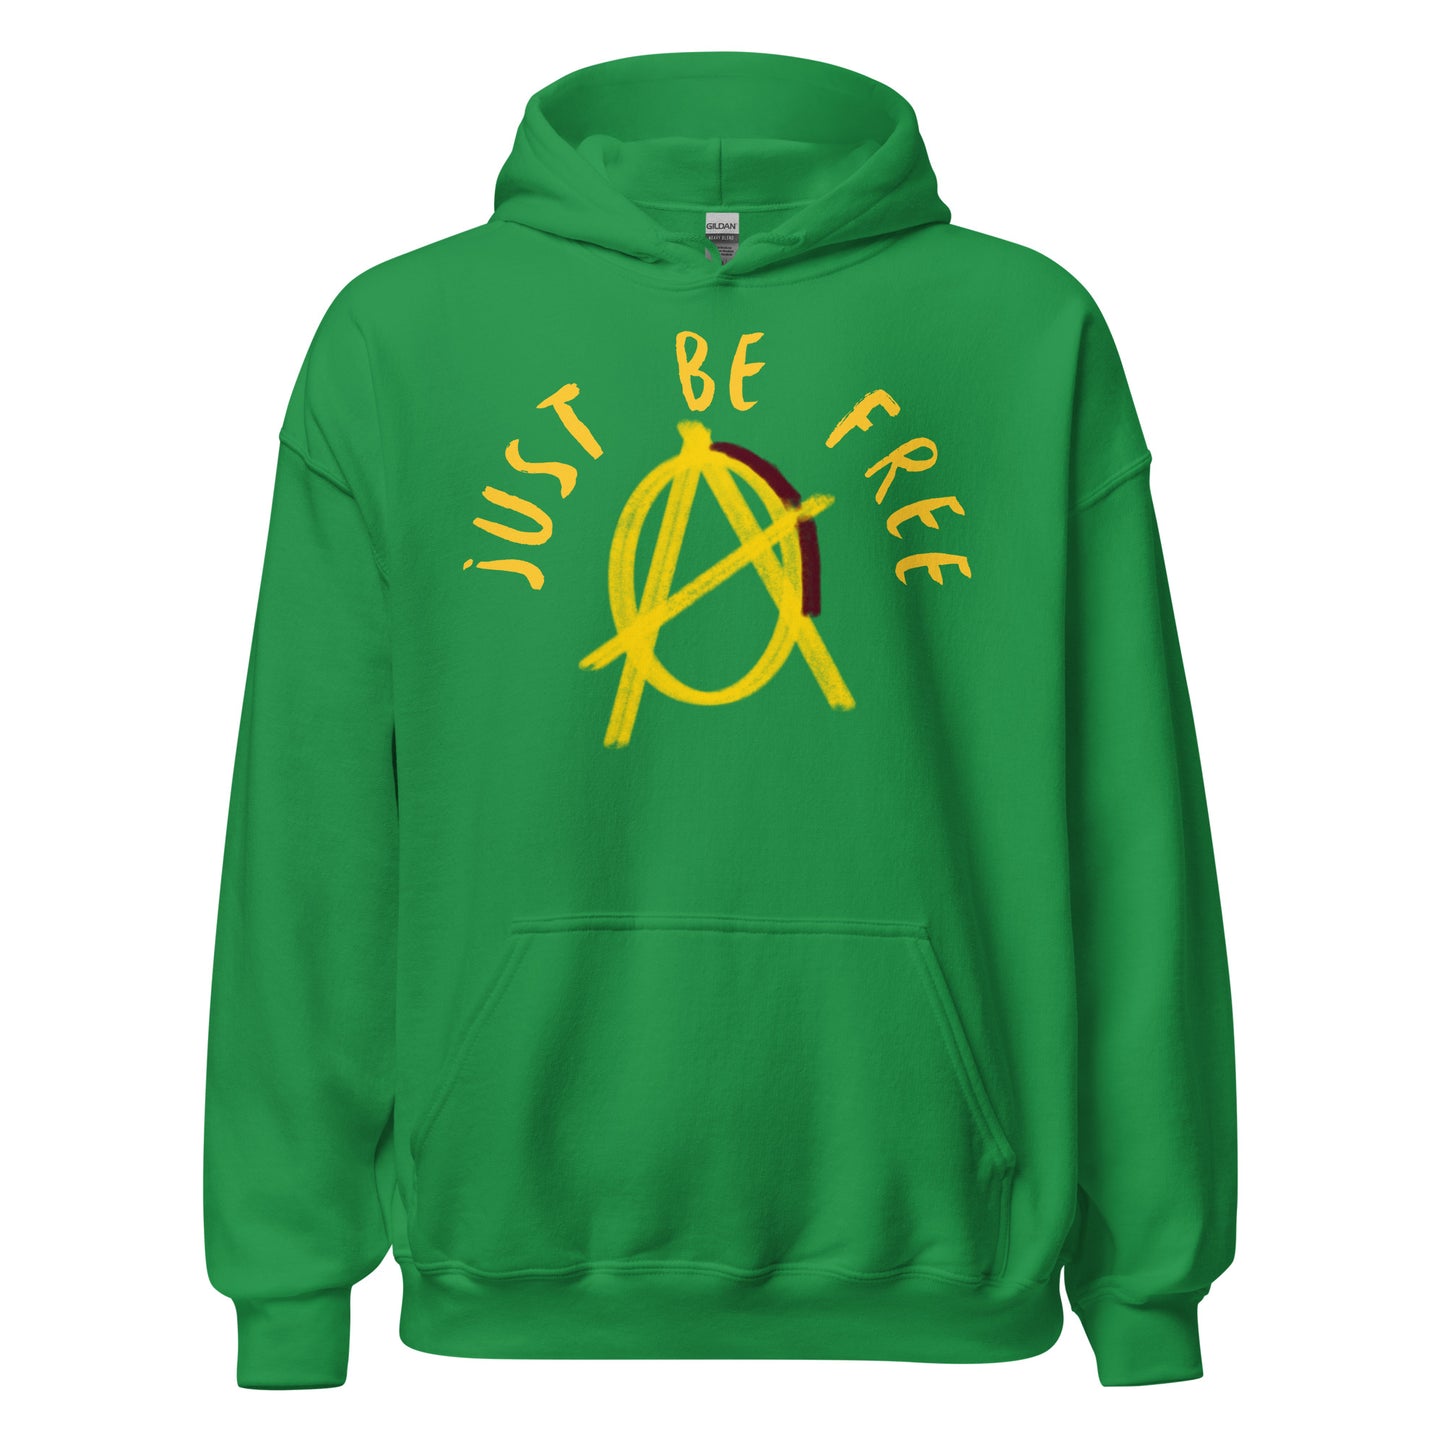 Anarchy Wear Gold "Just Be Free" Hoodie